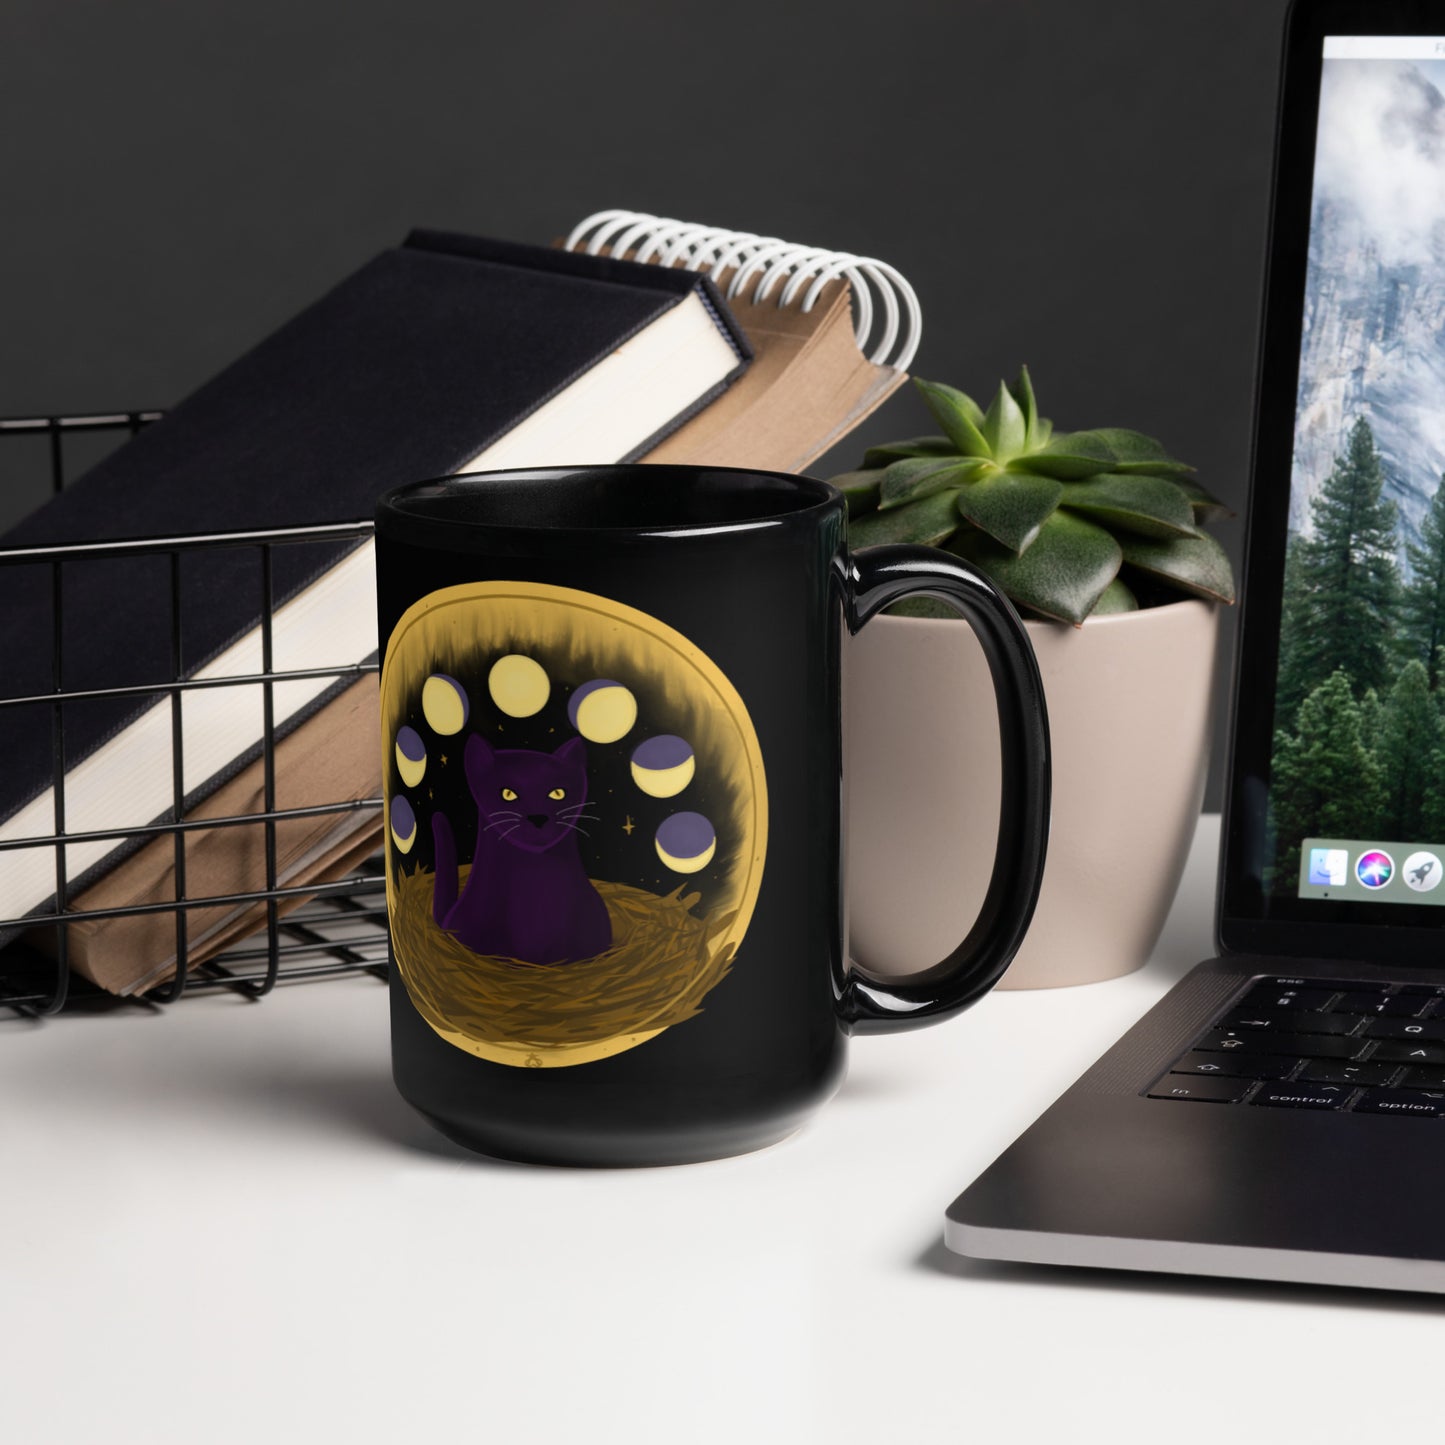 A black mug with a painting of a cat sitting in a nest with the phases of the moon over it, ringed in gold with twinkling gold stars behind it, sitting on a generic desk with a succulent, notebooks, and laptop.